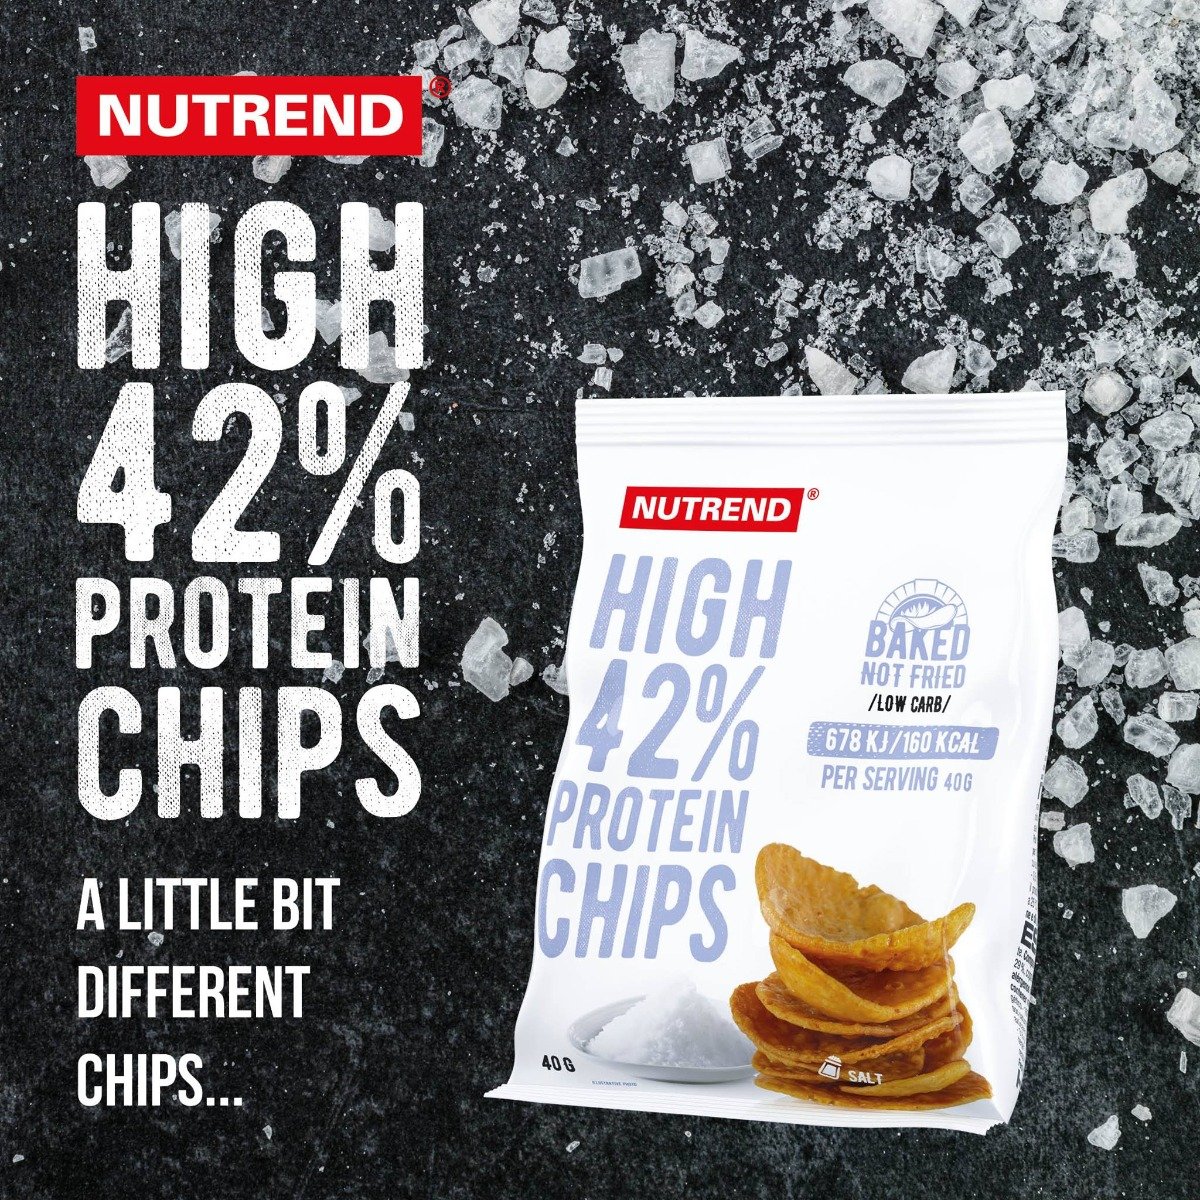 High Protein Chips - Nutrend